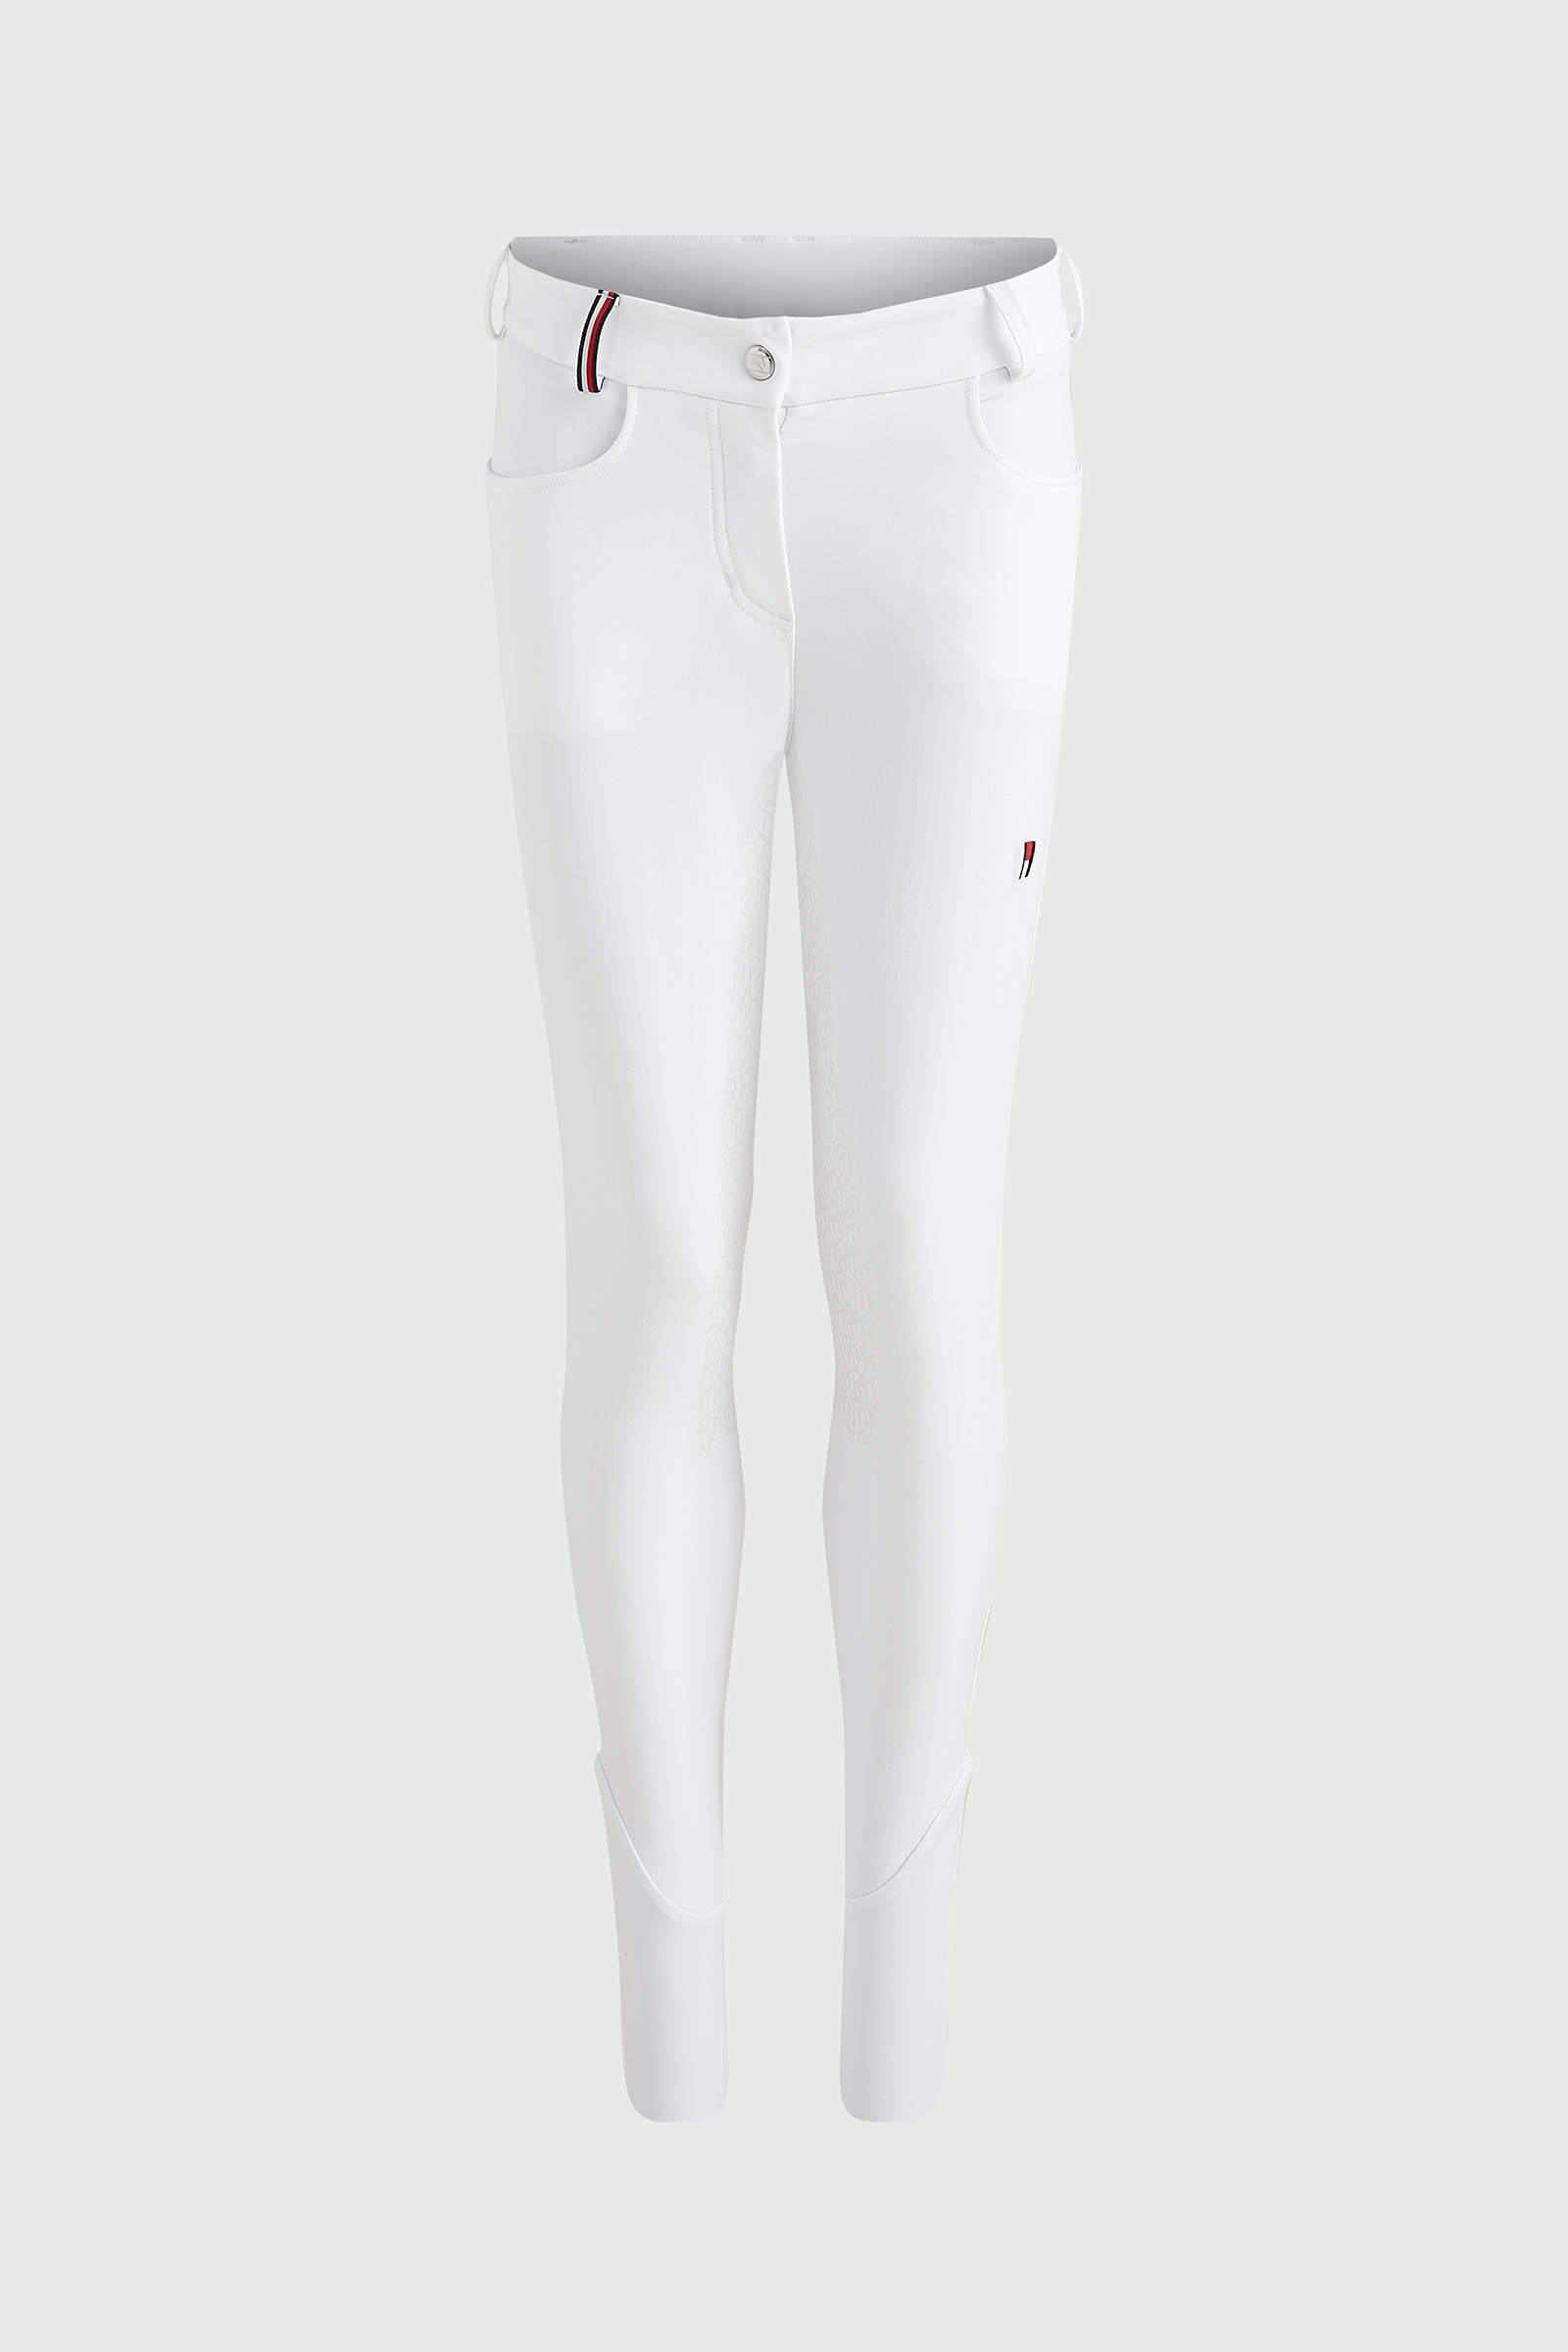 Buy Tommy Hilfiger Equestrian Classic Women's Full Seat Breeches